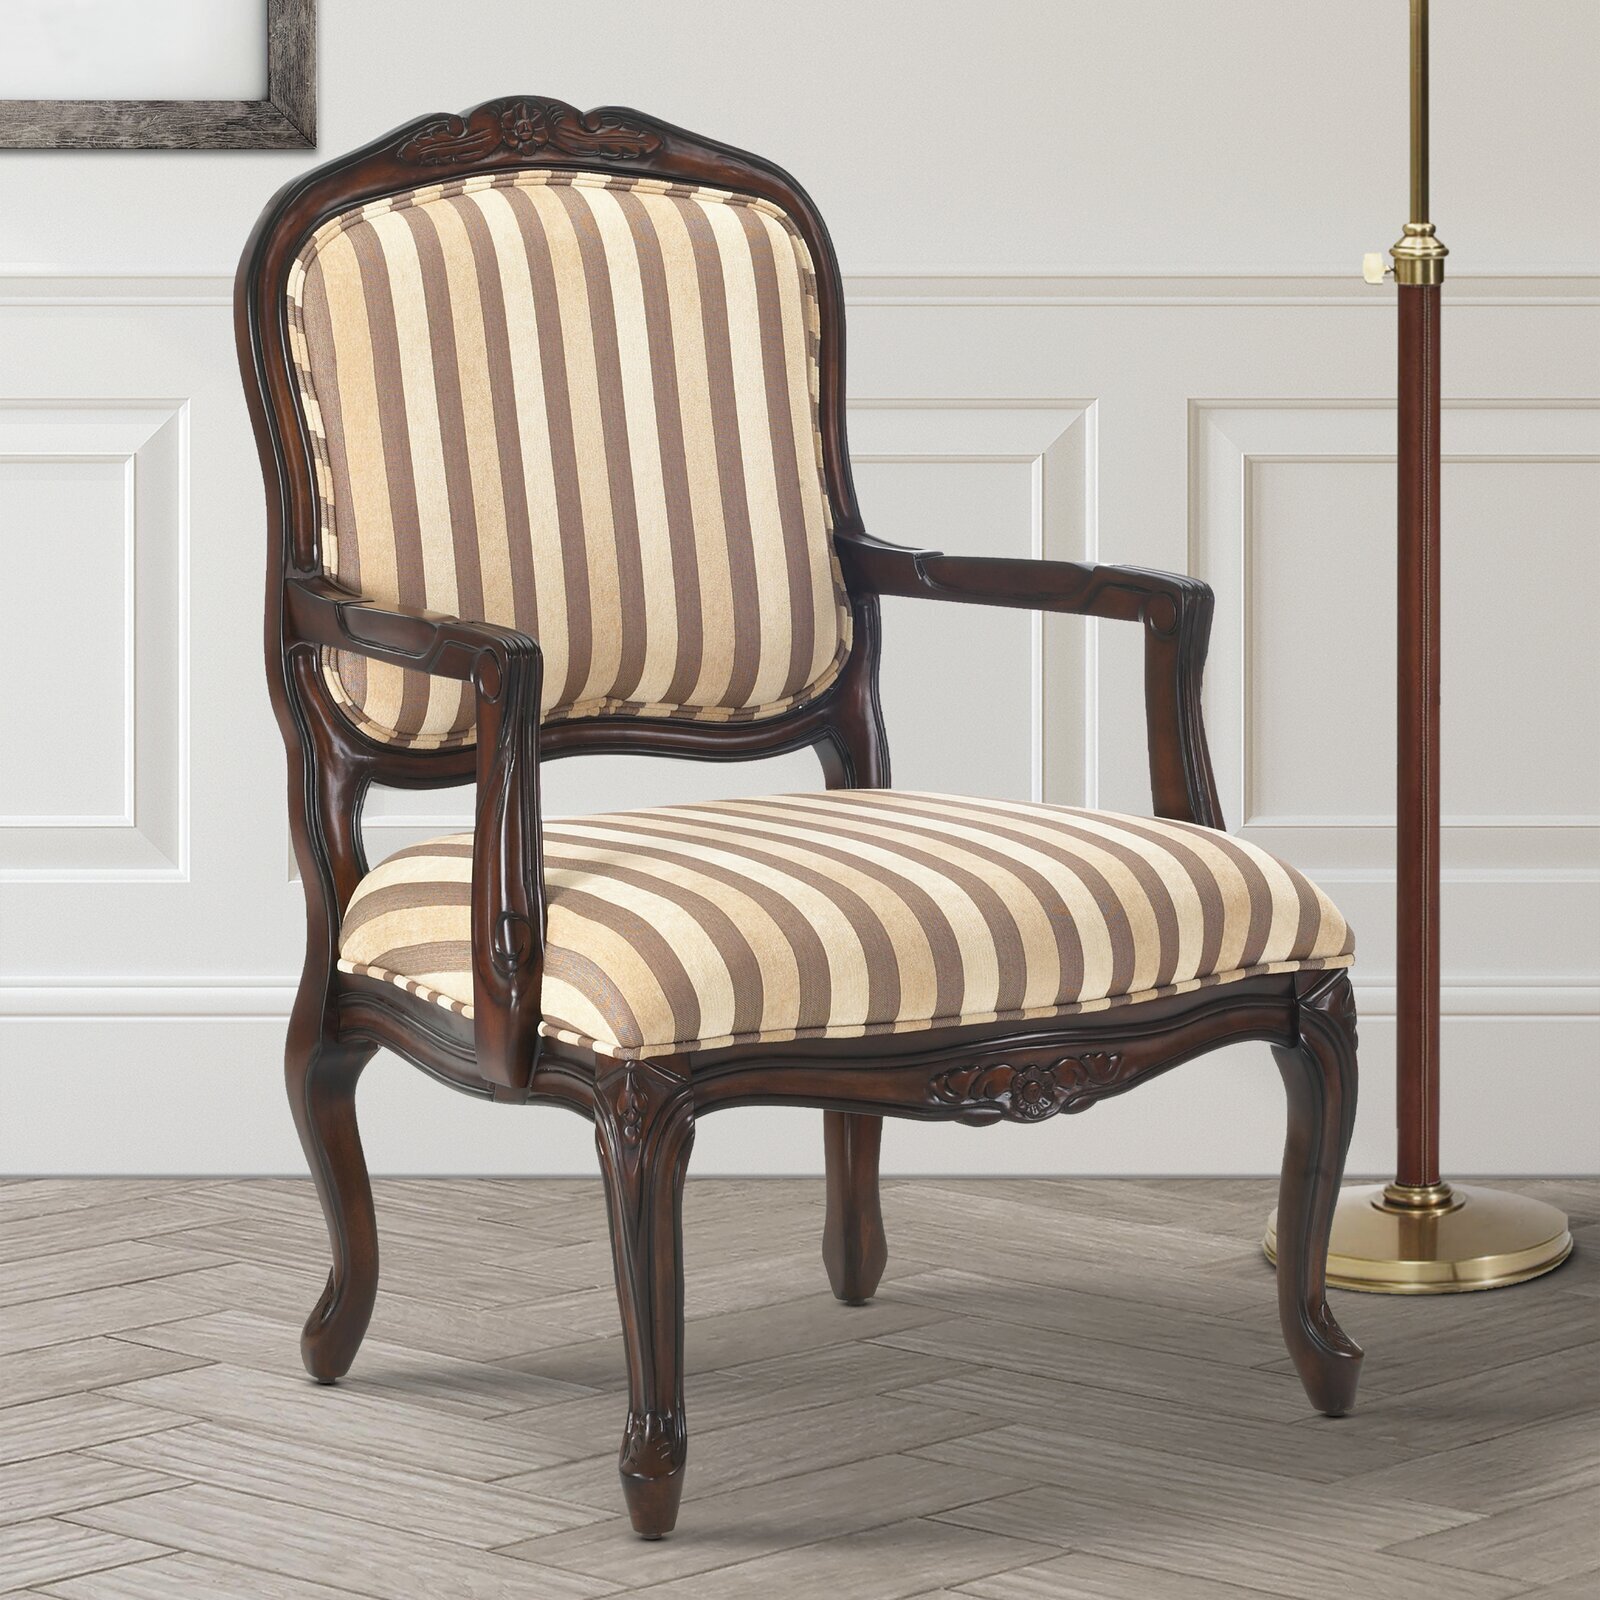 Victorian chair with striped motif